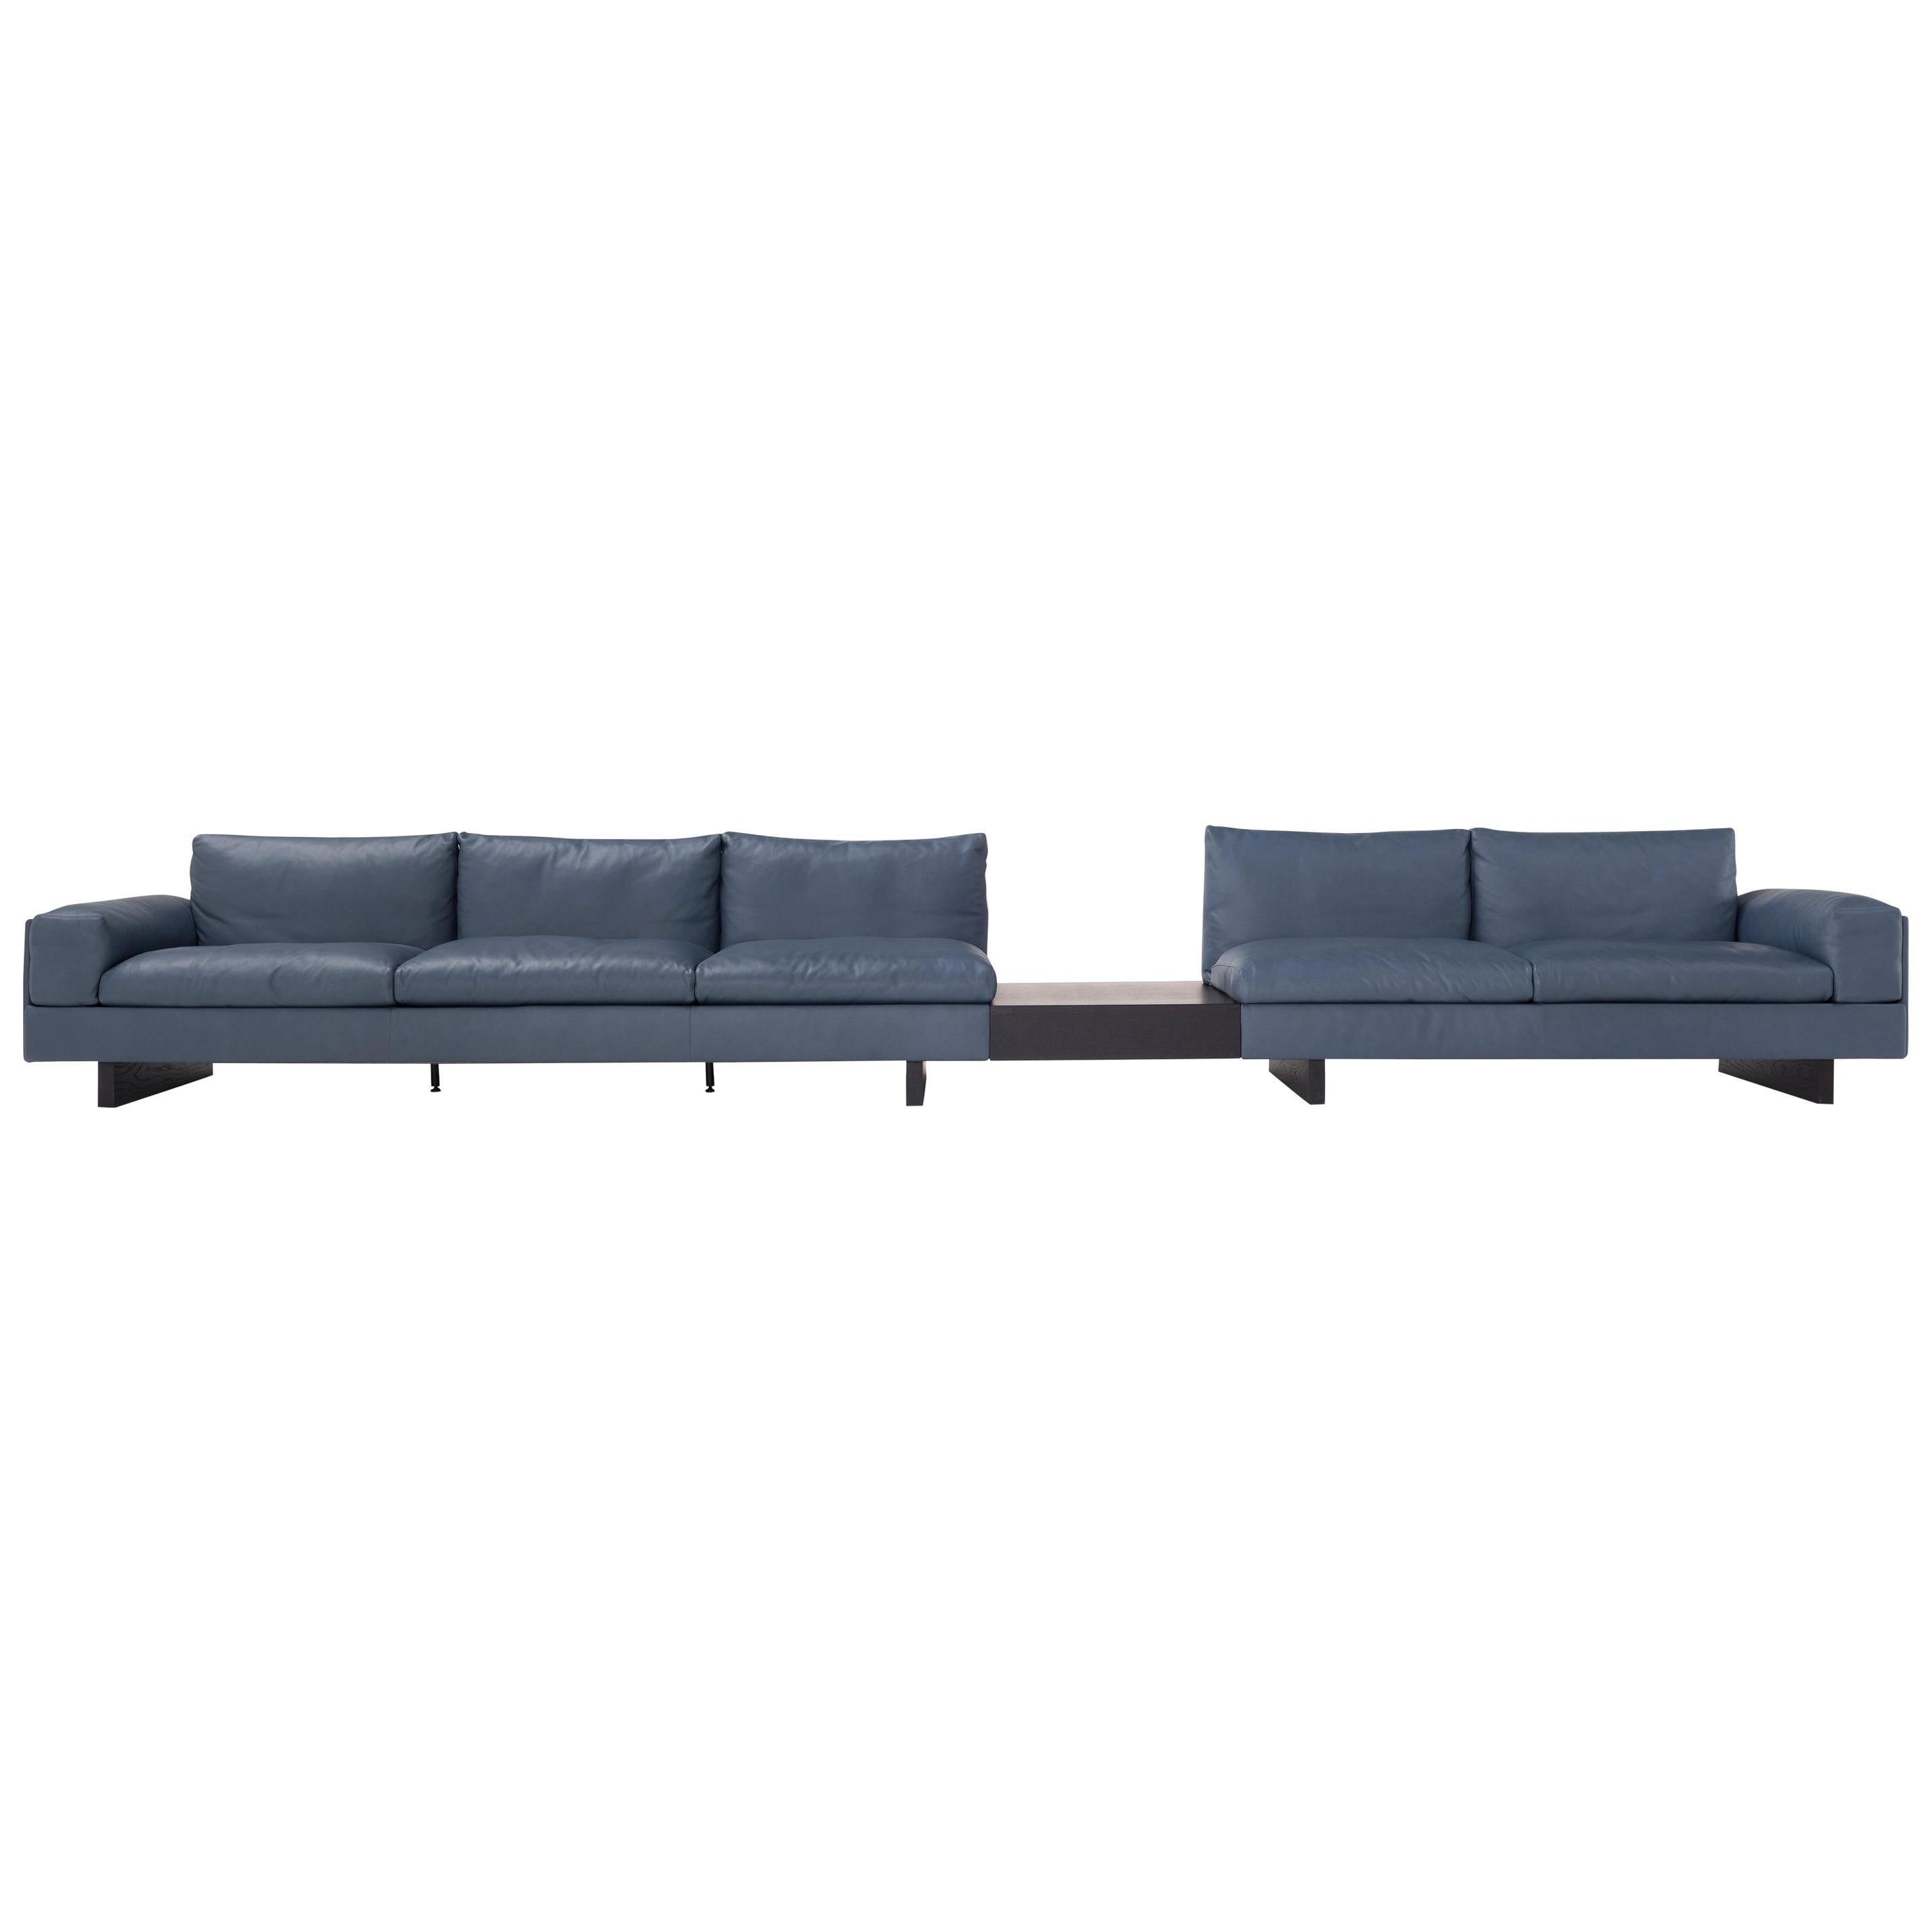 Amura 'Tau' Sofa in Blue Leather with Connected Coffee Table by Emanuel Gargano For Sale